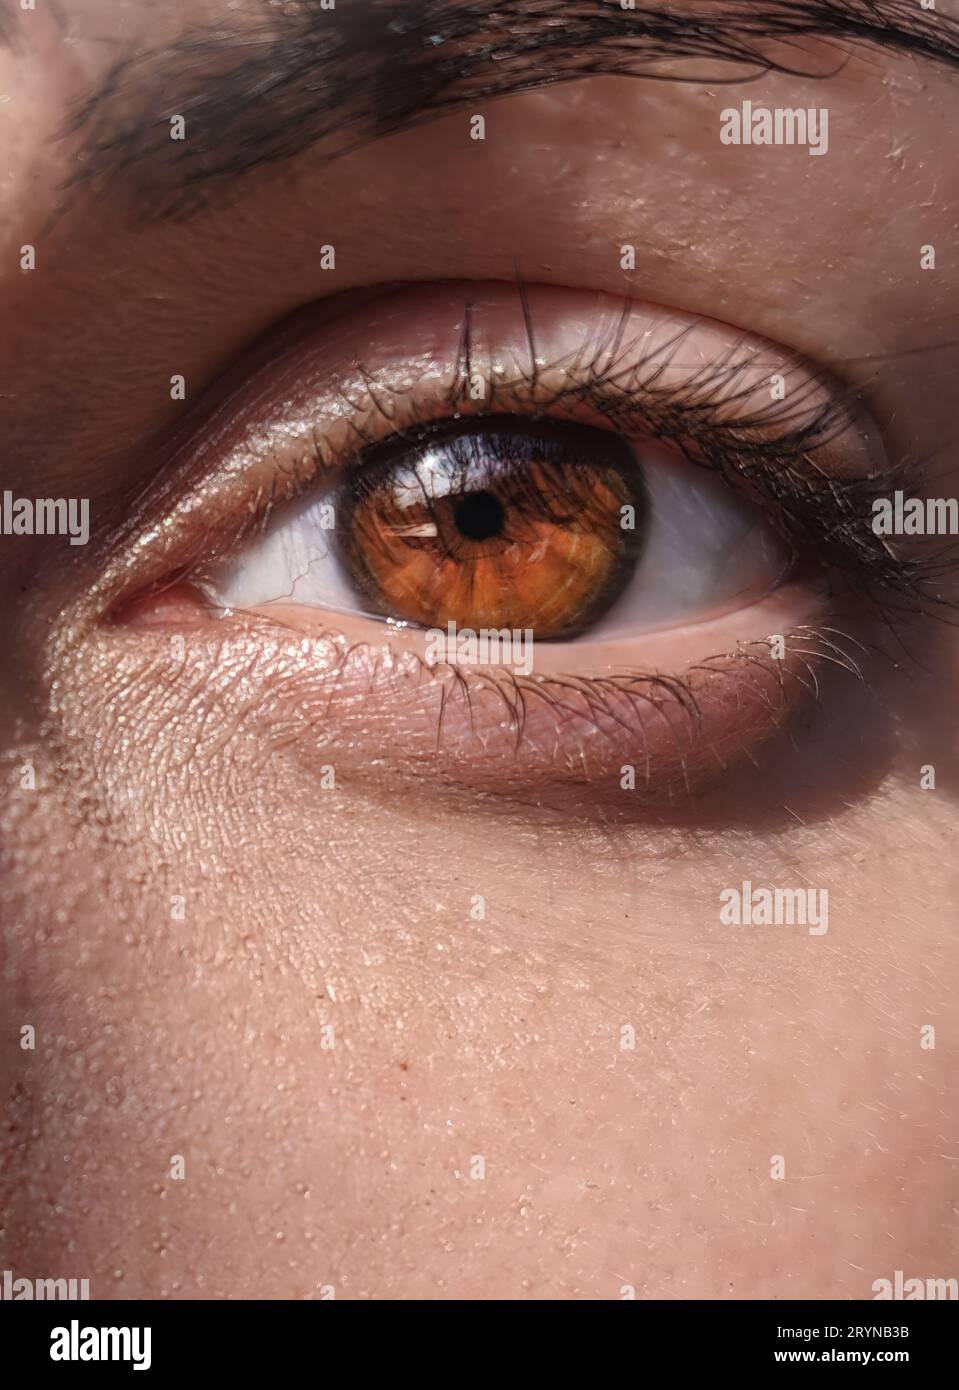 Close woman eye images, beautiful brown color of the iris of the eye. Woman eye images. Stock Photo